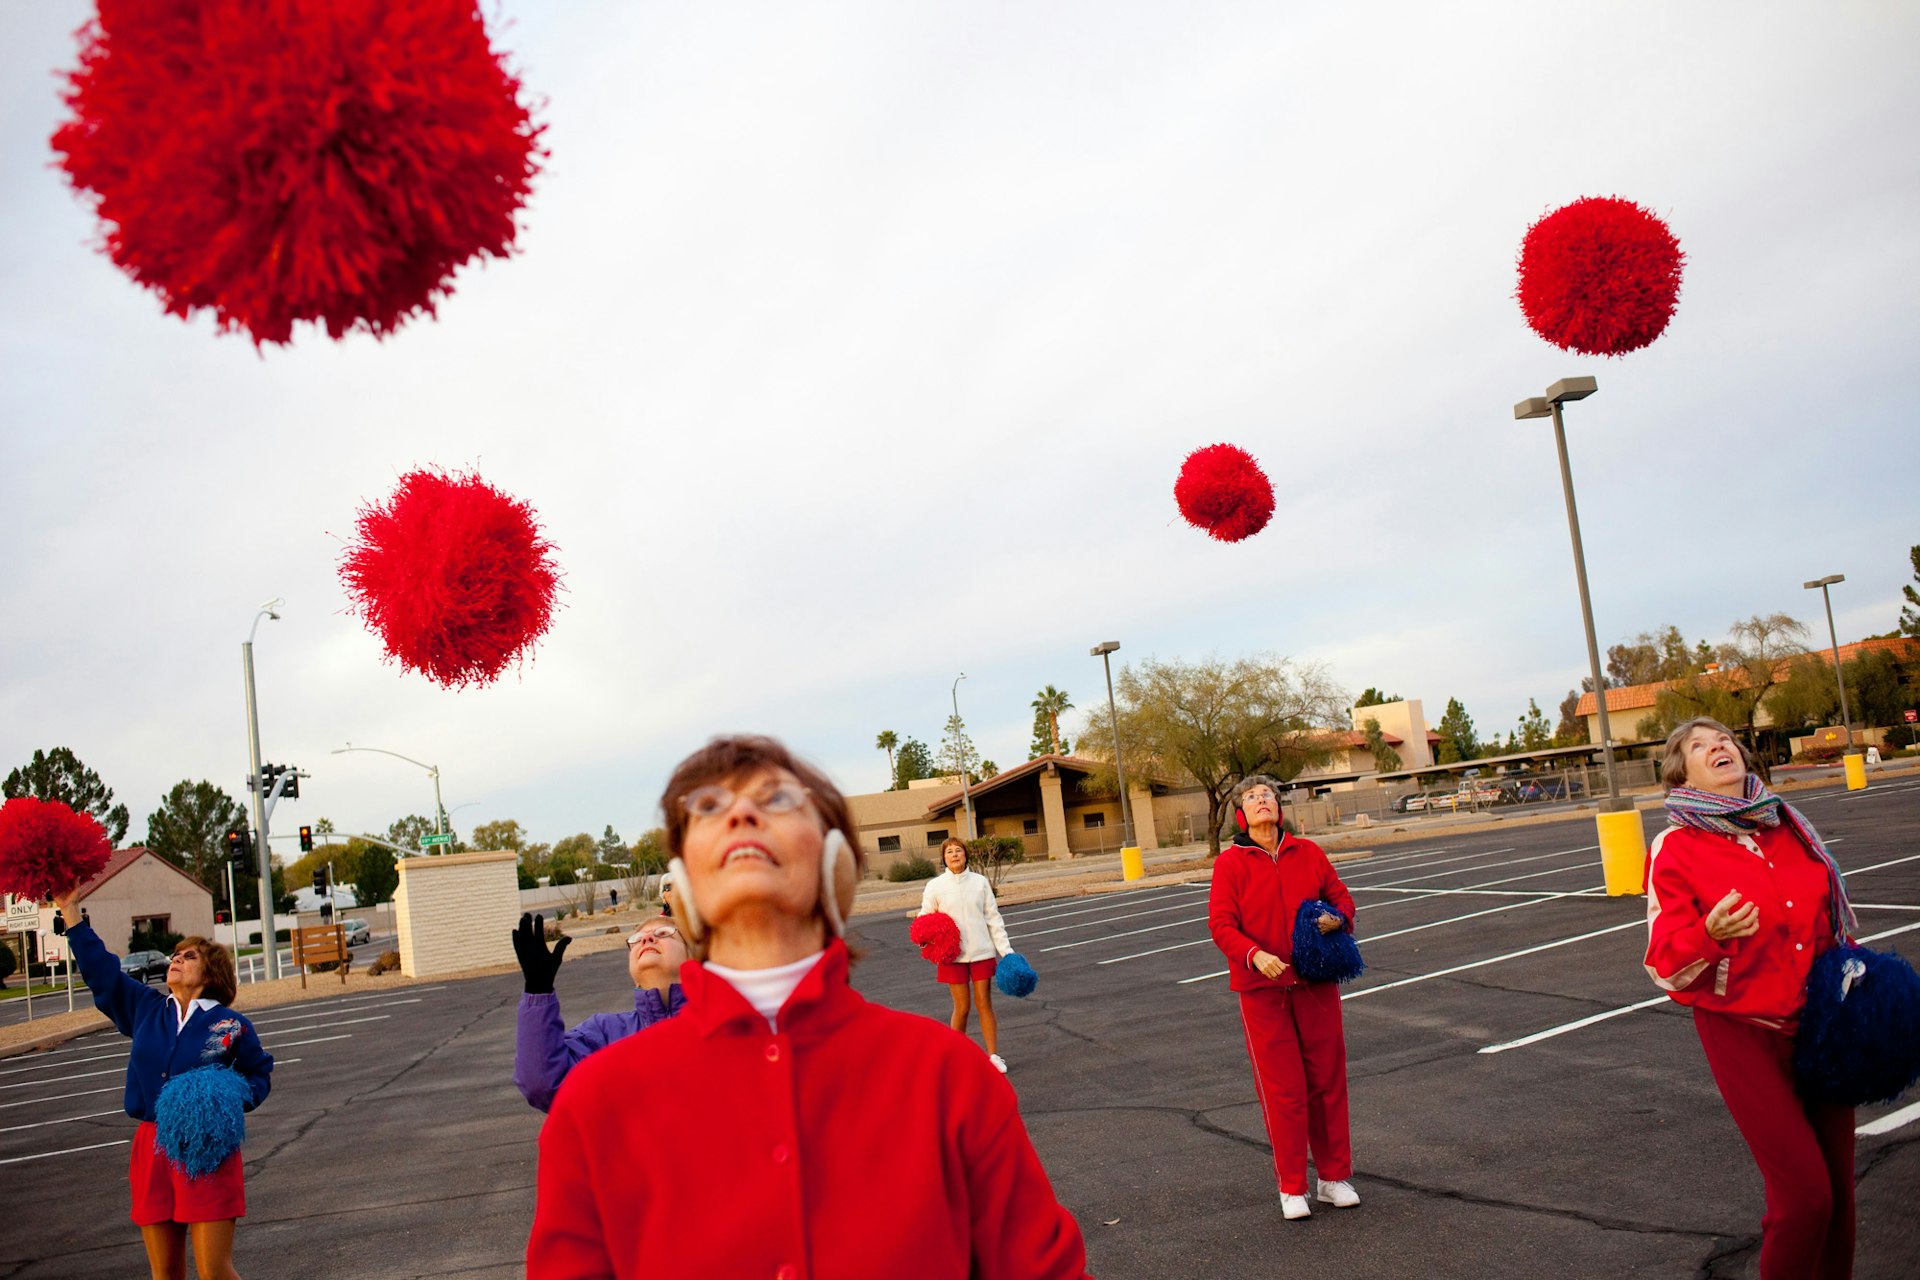 The Sun City Poms Marching Unit practices for an upcoming parade in a parking lot outside of a recreation center in Sun City, Arizona Decmeber 10, 2009.